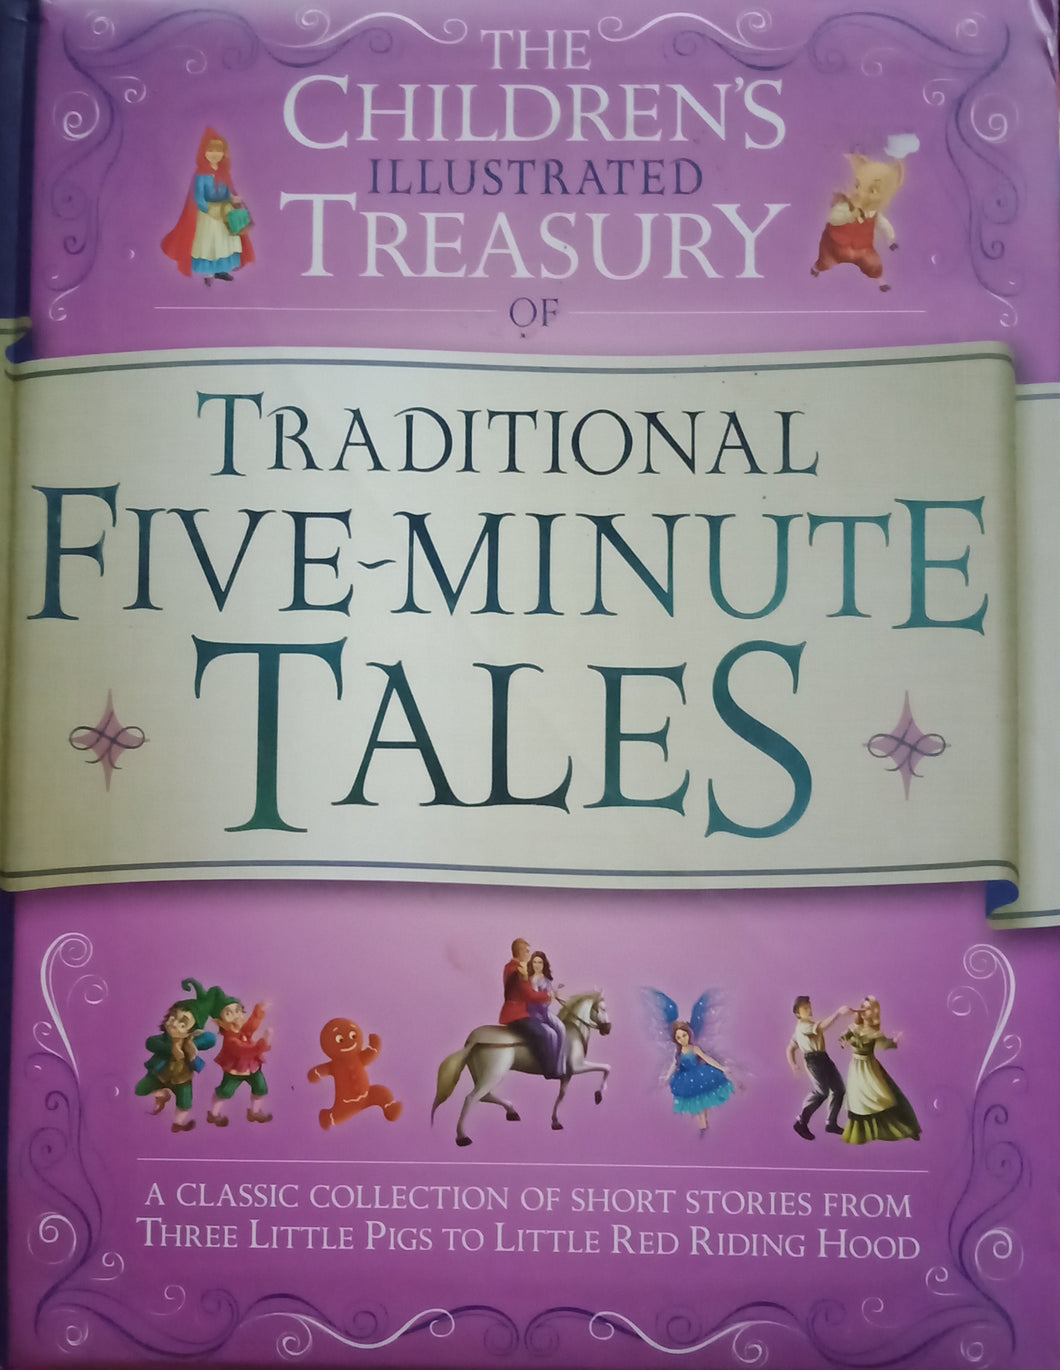 The Children's Illustrated Treasury Of Traditional Five-Minute Tales